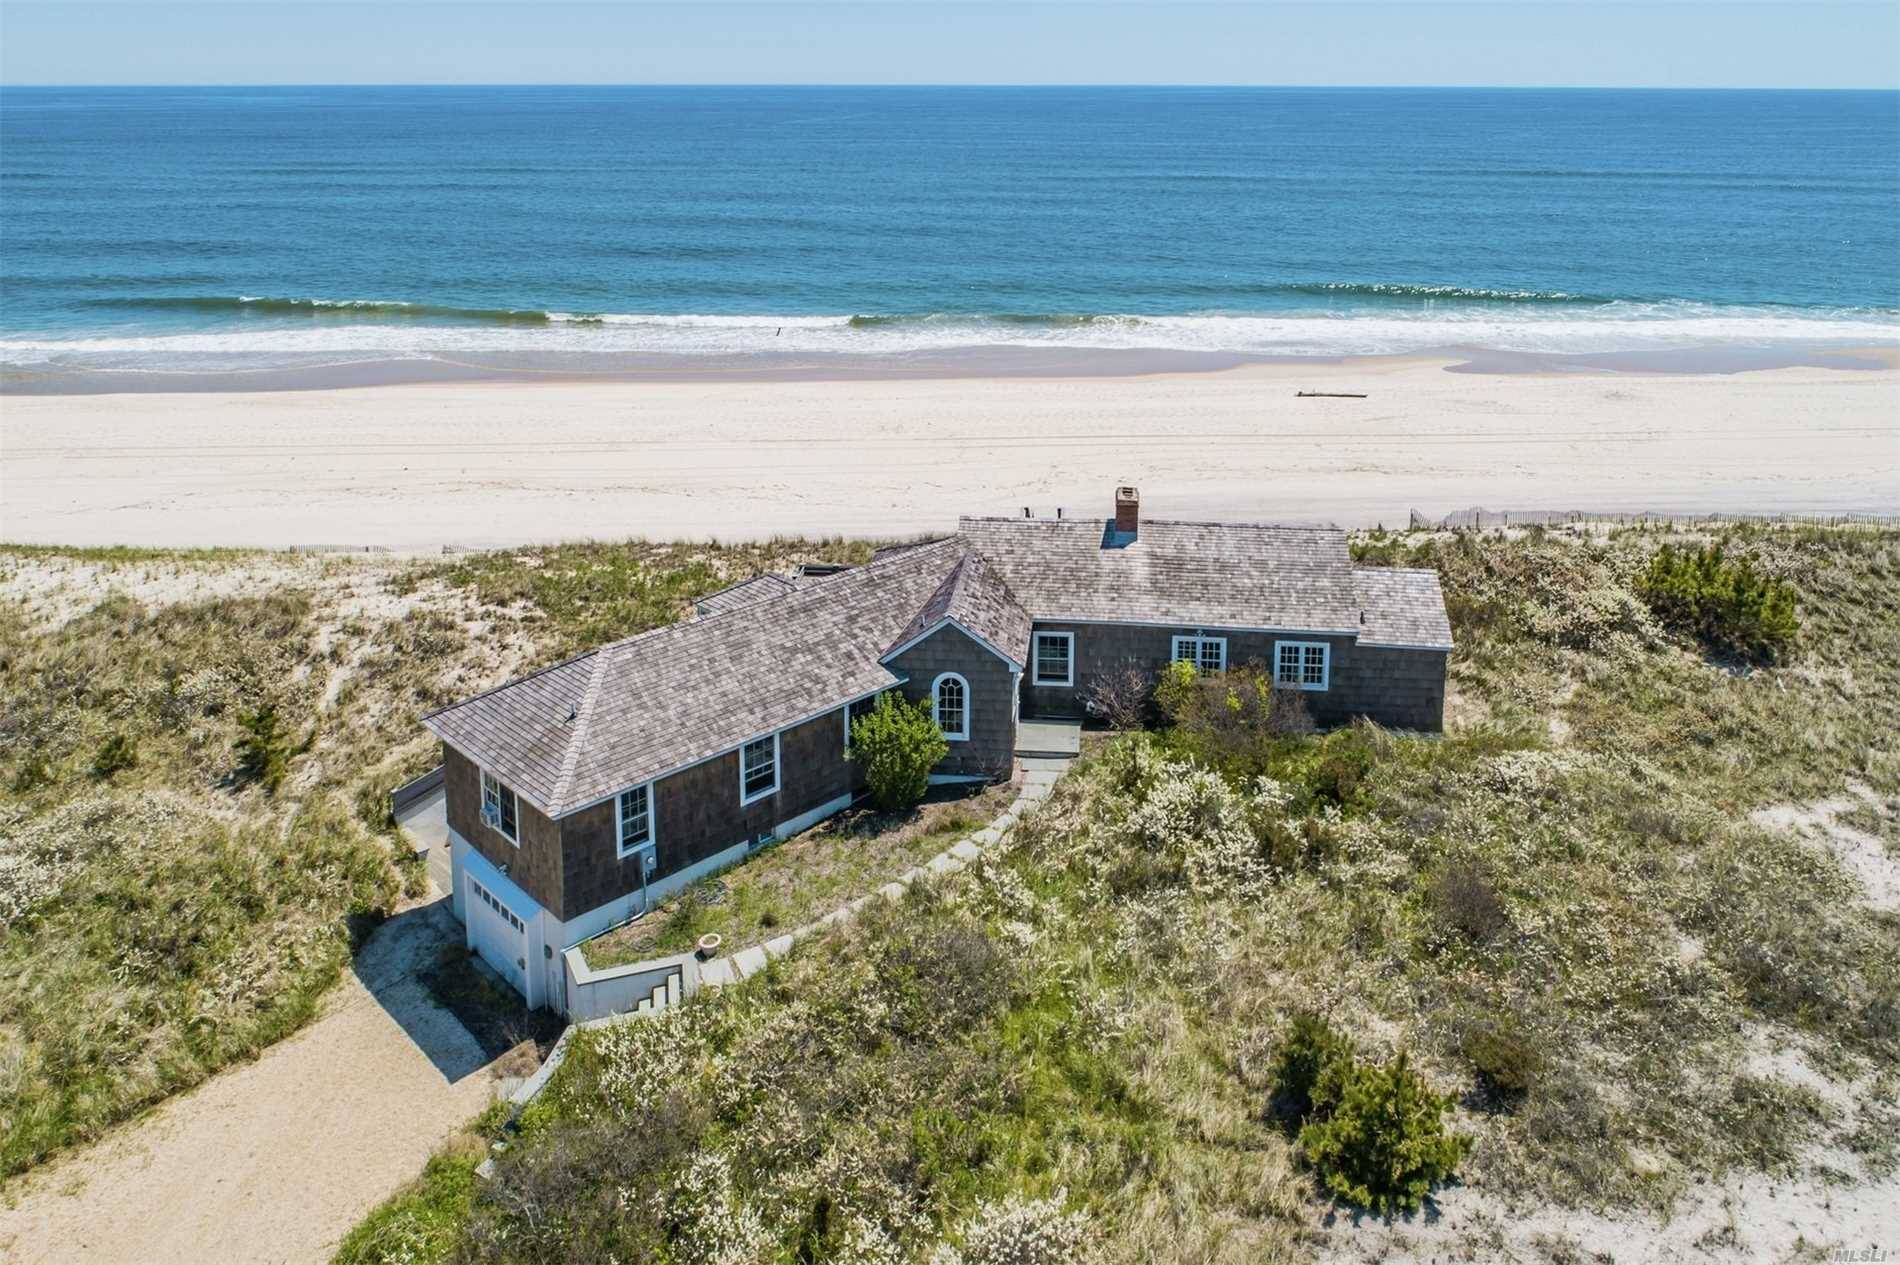 Quogue Oceanfront Privacy Abounds On This Three Acre Ocean Front Property Situated Directly On The Beach, This Five Bedroom Beach House Features Spacious Master Bedroom Suite With Stone Fireplace And ...